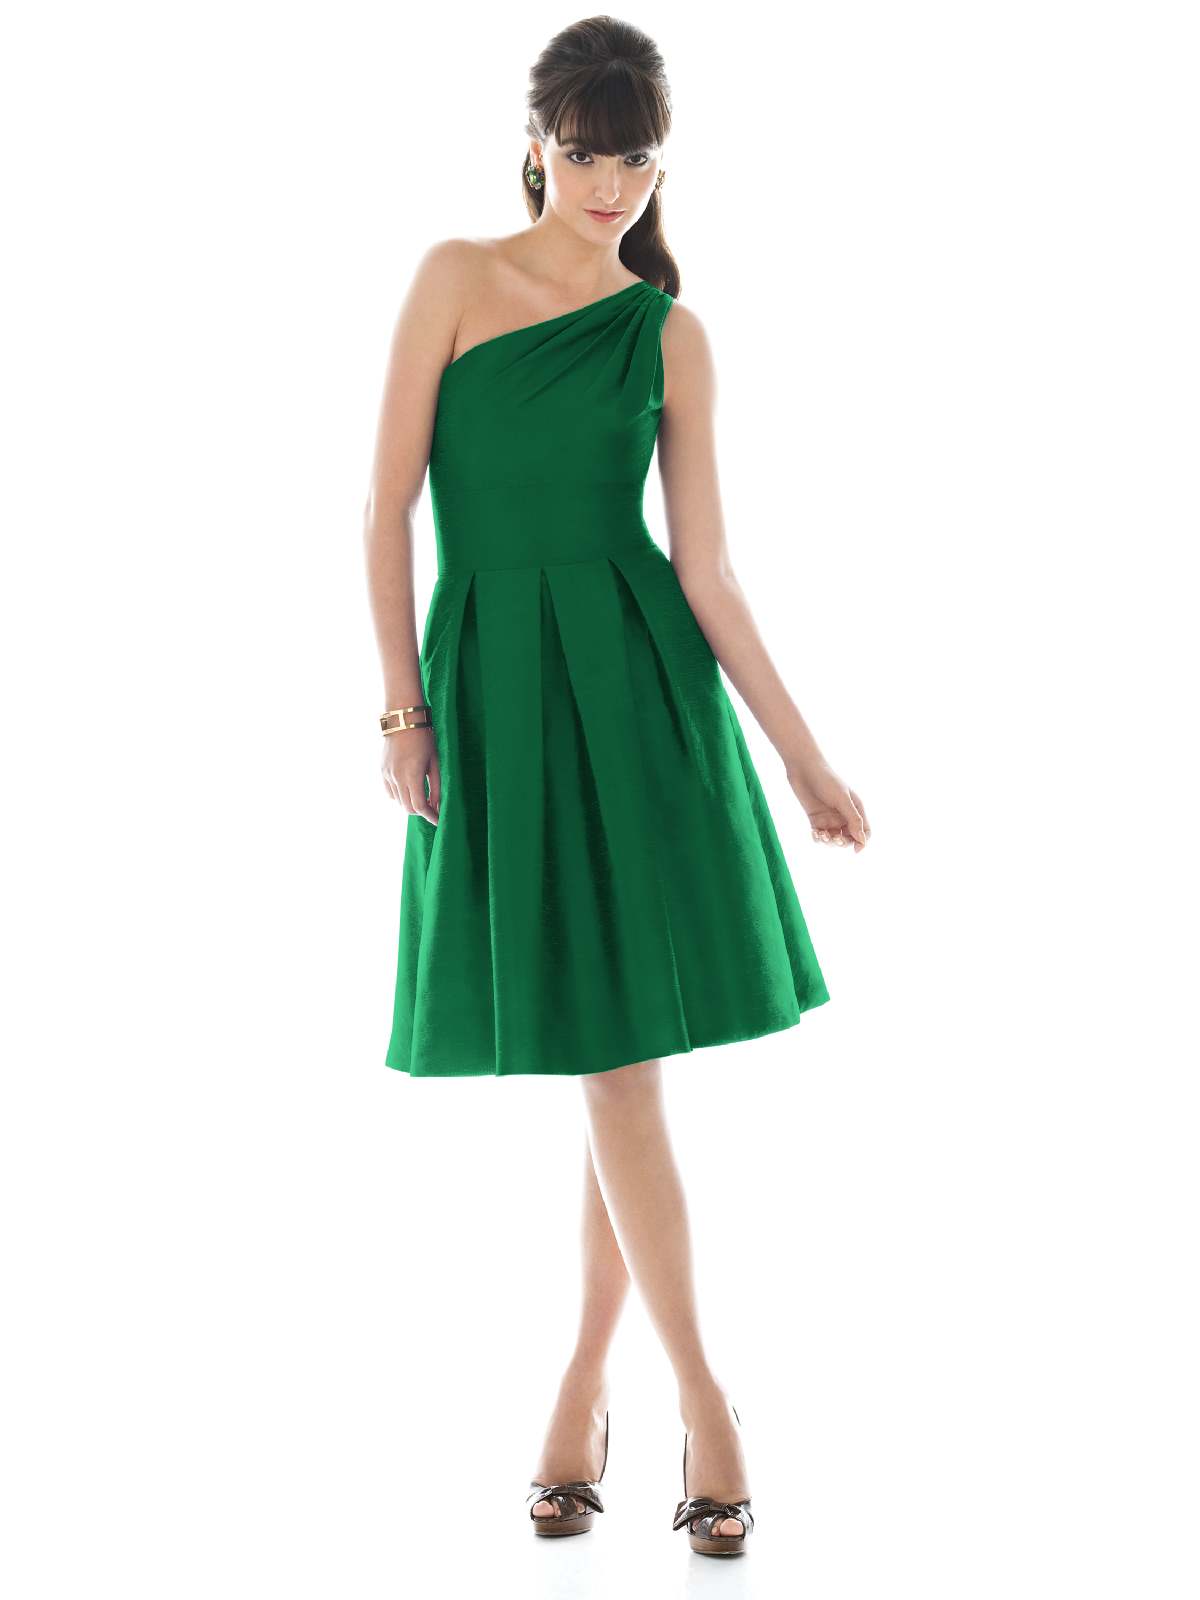 Green A Line One Shoulder Zipper Knee Length Satin Prom Dresses With Draped Skirt 